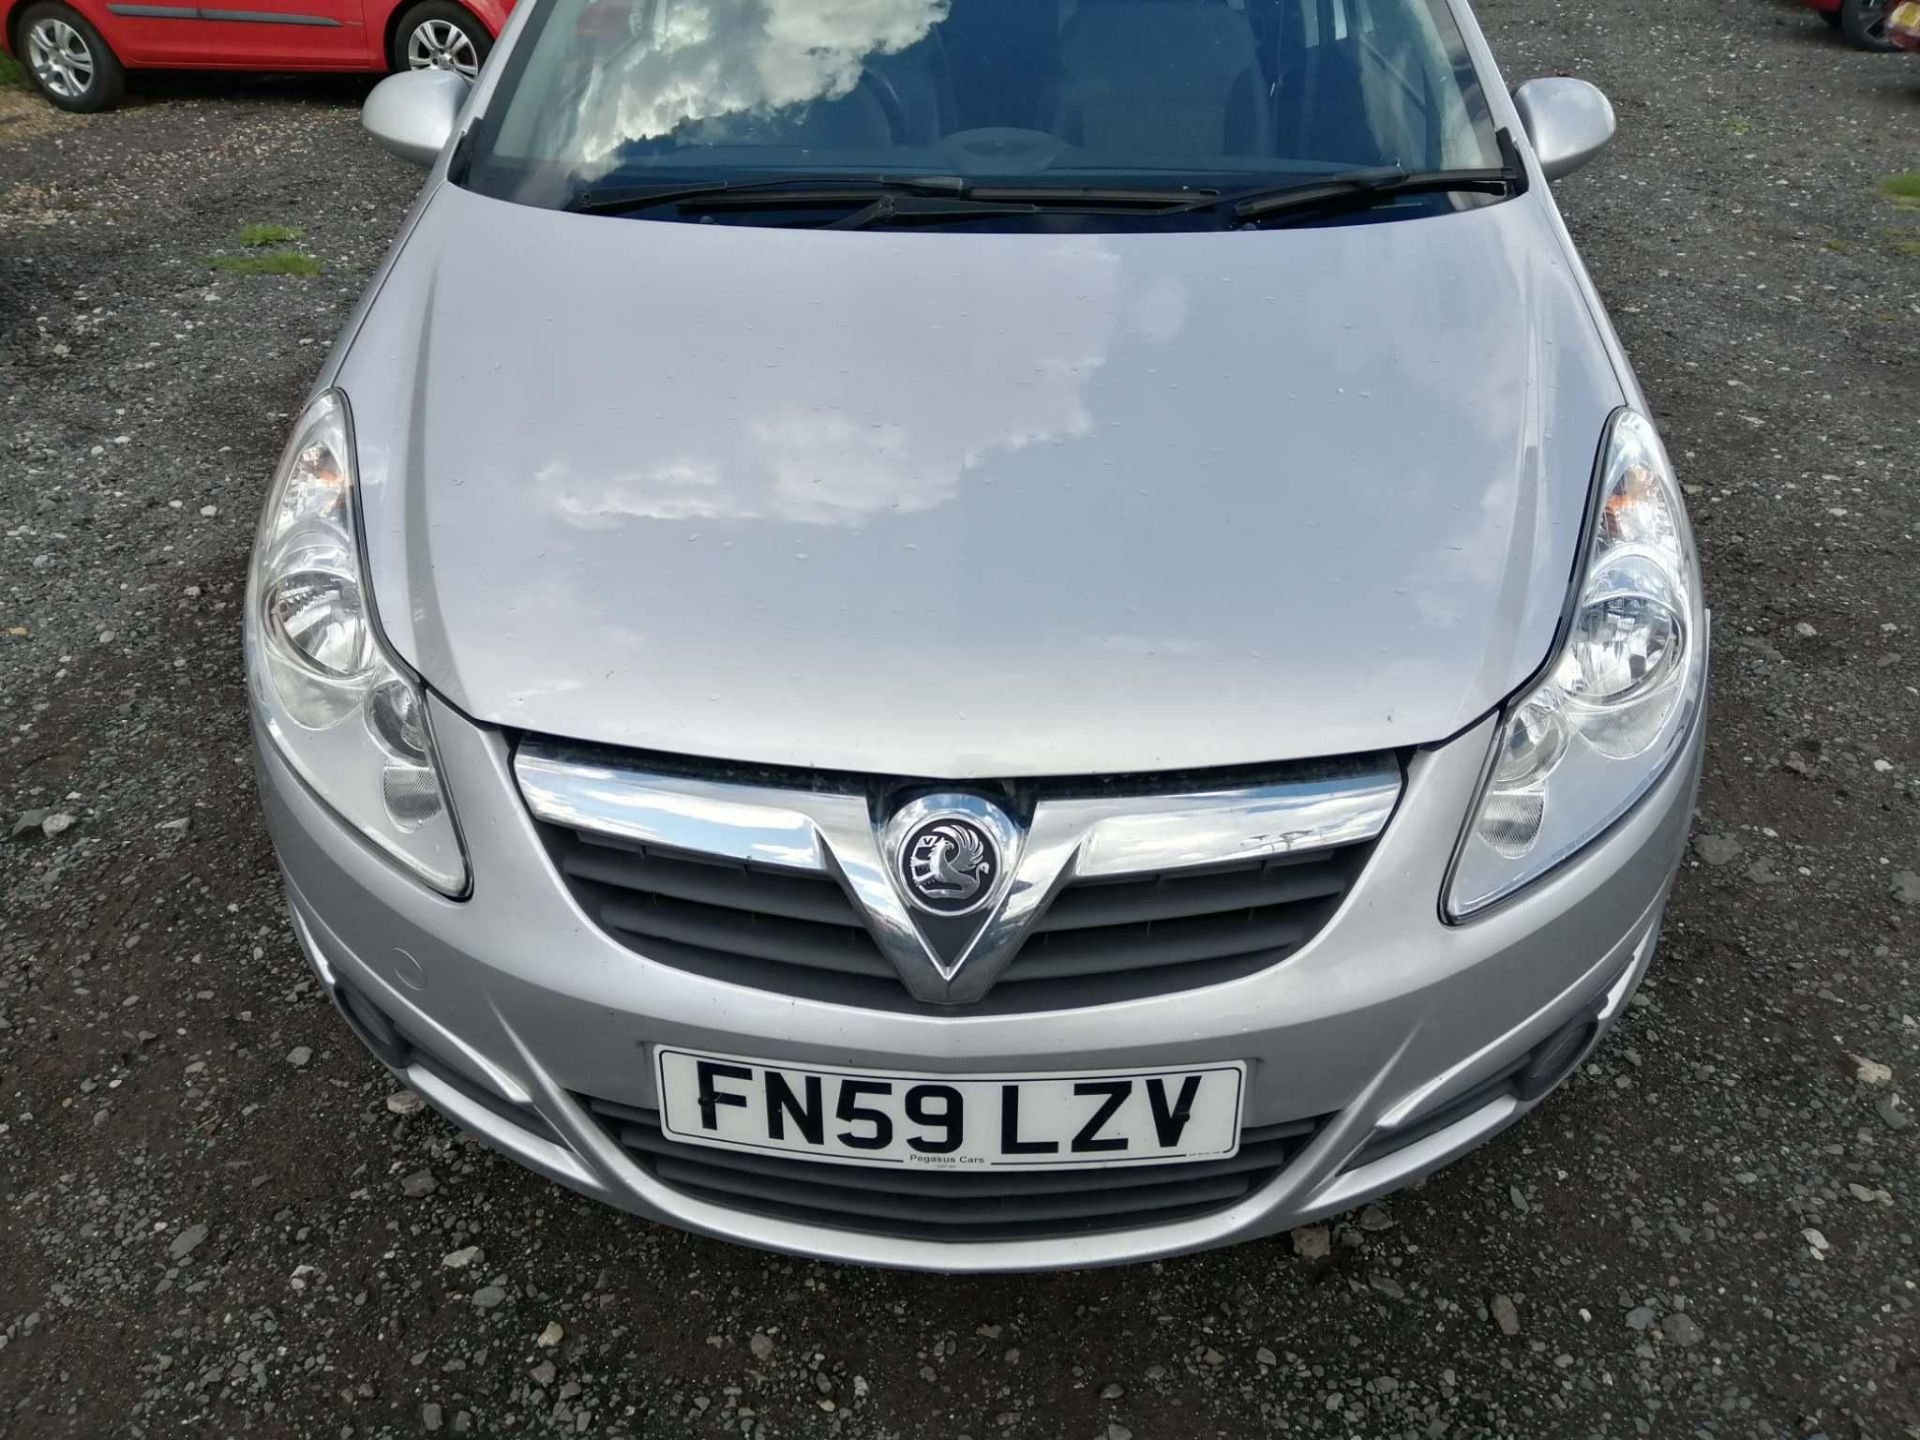 2010 Vauxhall Corsa 1.2 Design 3dr Hatchback - CL505 - NO VAT ON THE HAMMER - Location: Corby - Image 2 of 11